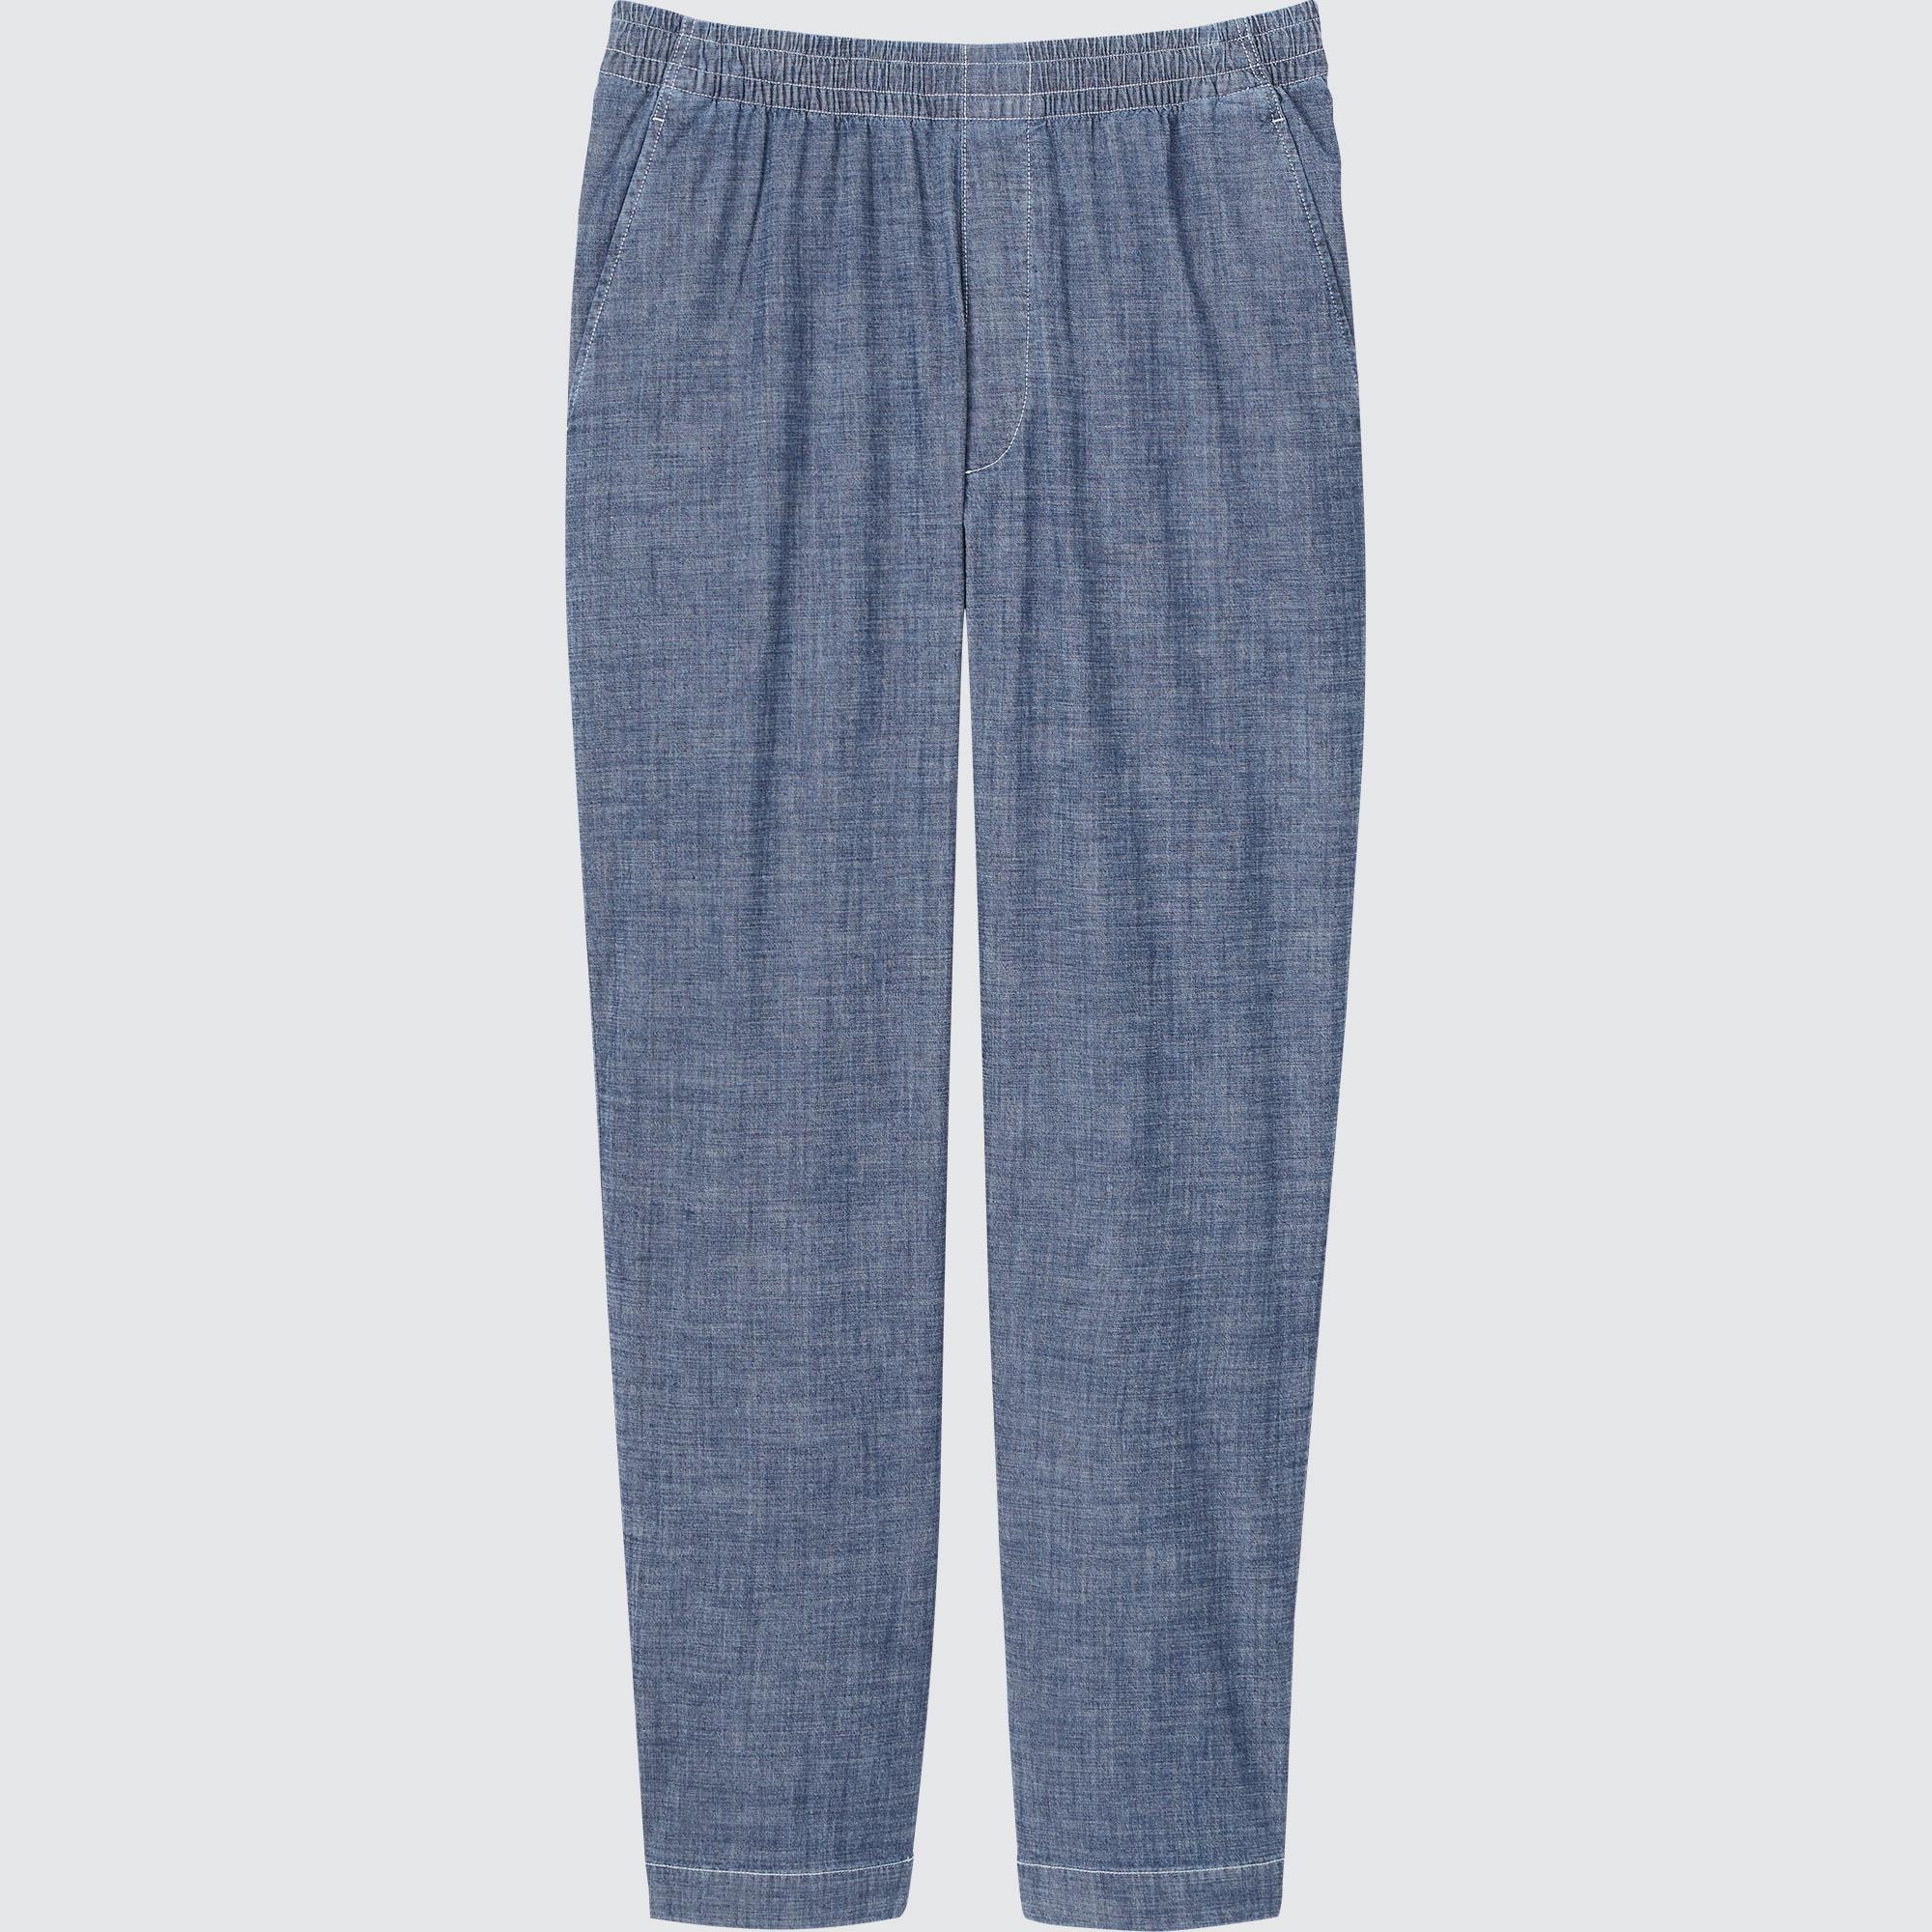 UNIQLO Chambray Easy Relaxed Pants | StyleHint